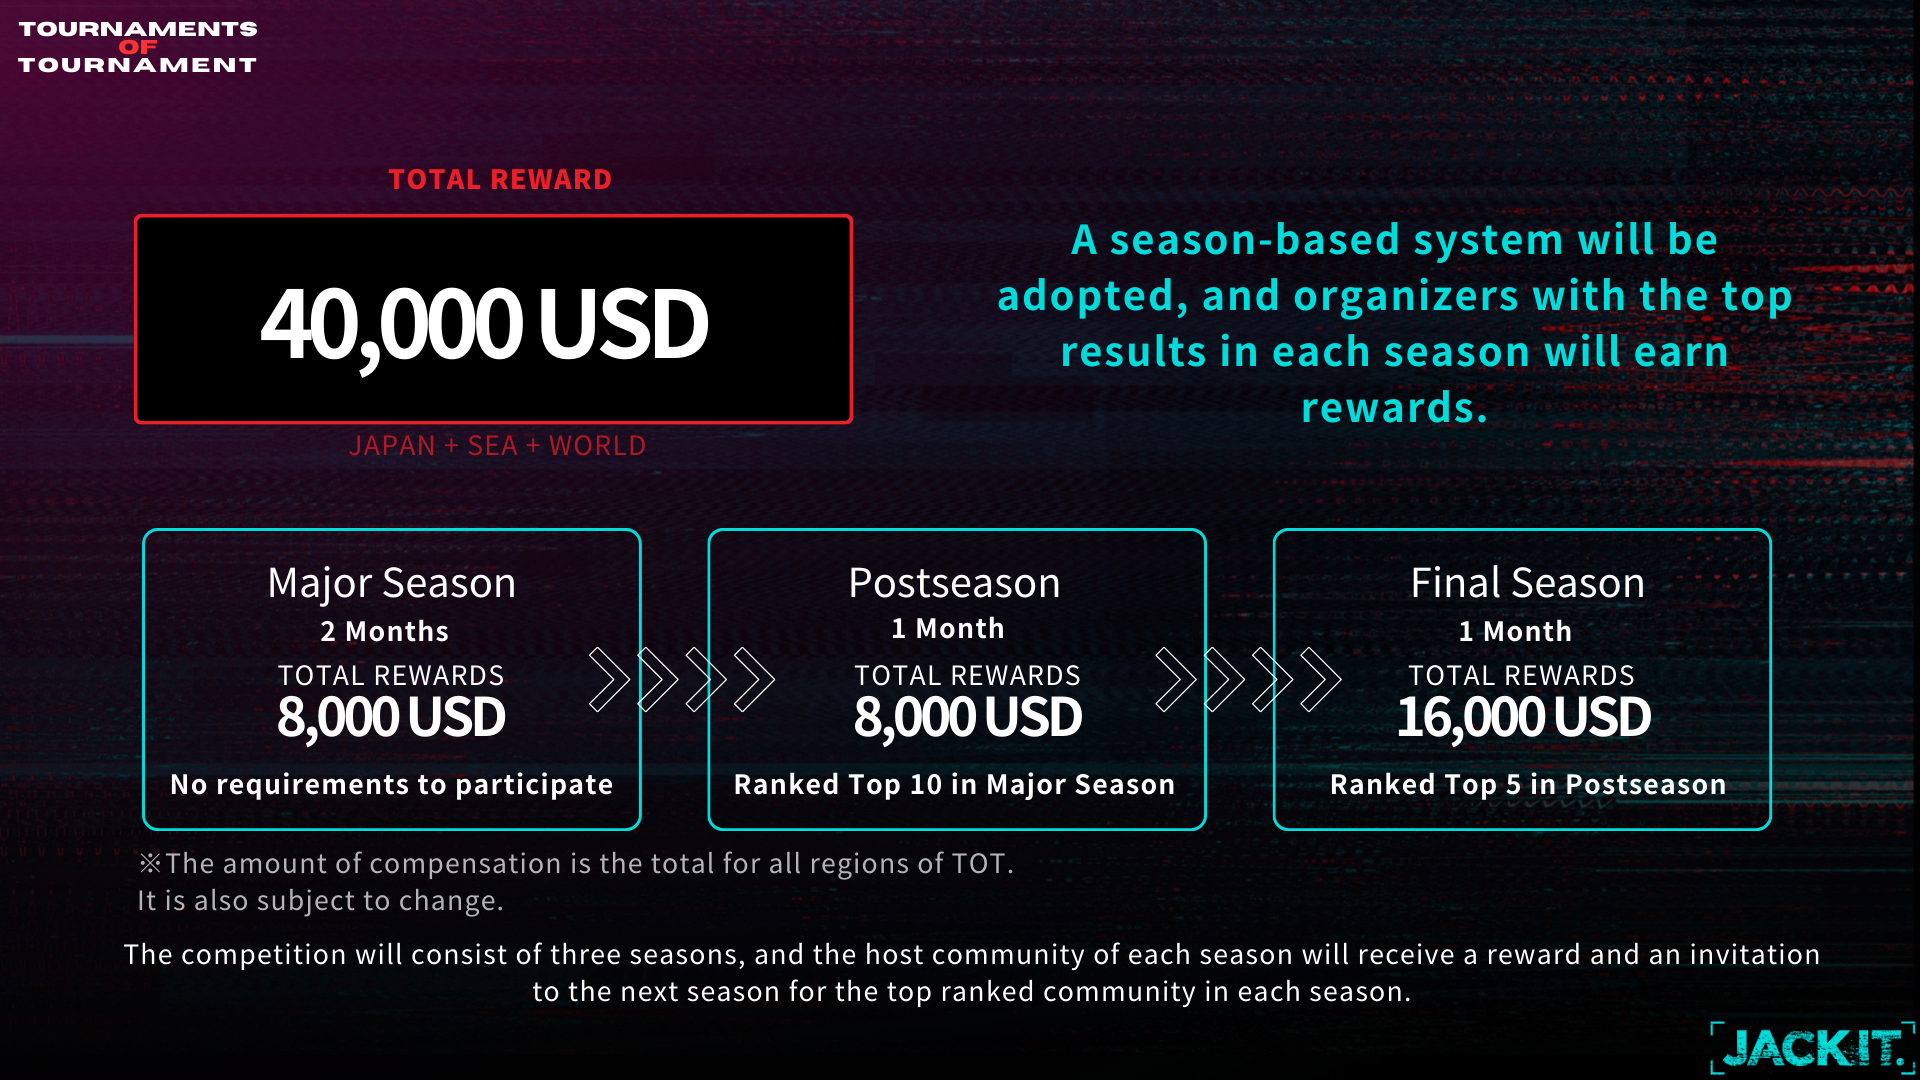 JACK IT organizes Tournaments of Tournament game tournament in Southeast Asia region with a prize pool of up to ,000 USD